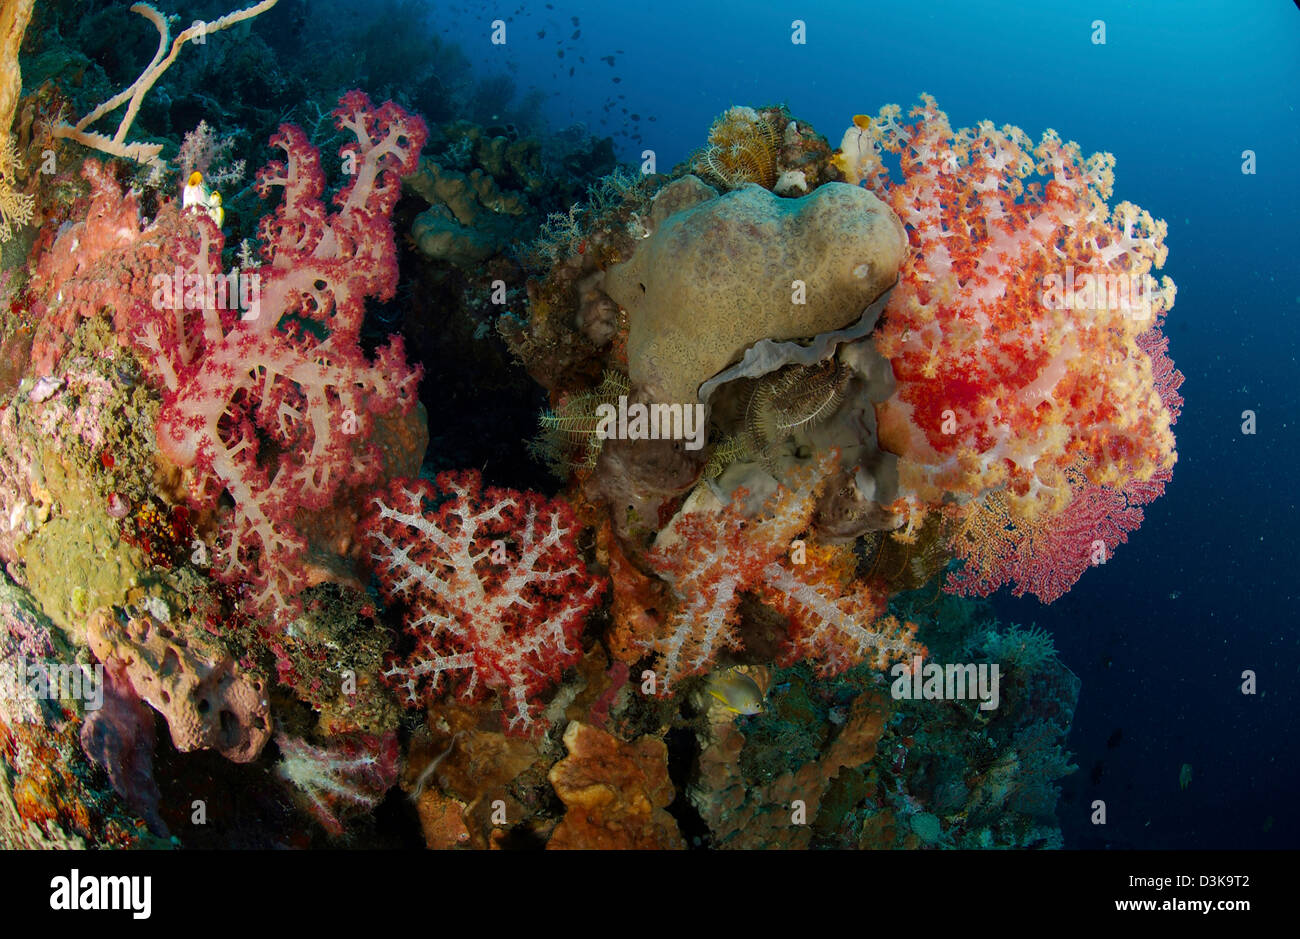 Reef scene with gorgonian sea fans and soft corals, North Sulawesi, Indonesia. Stock Photo